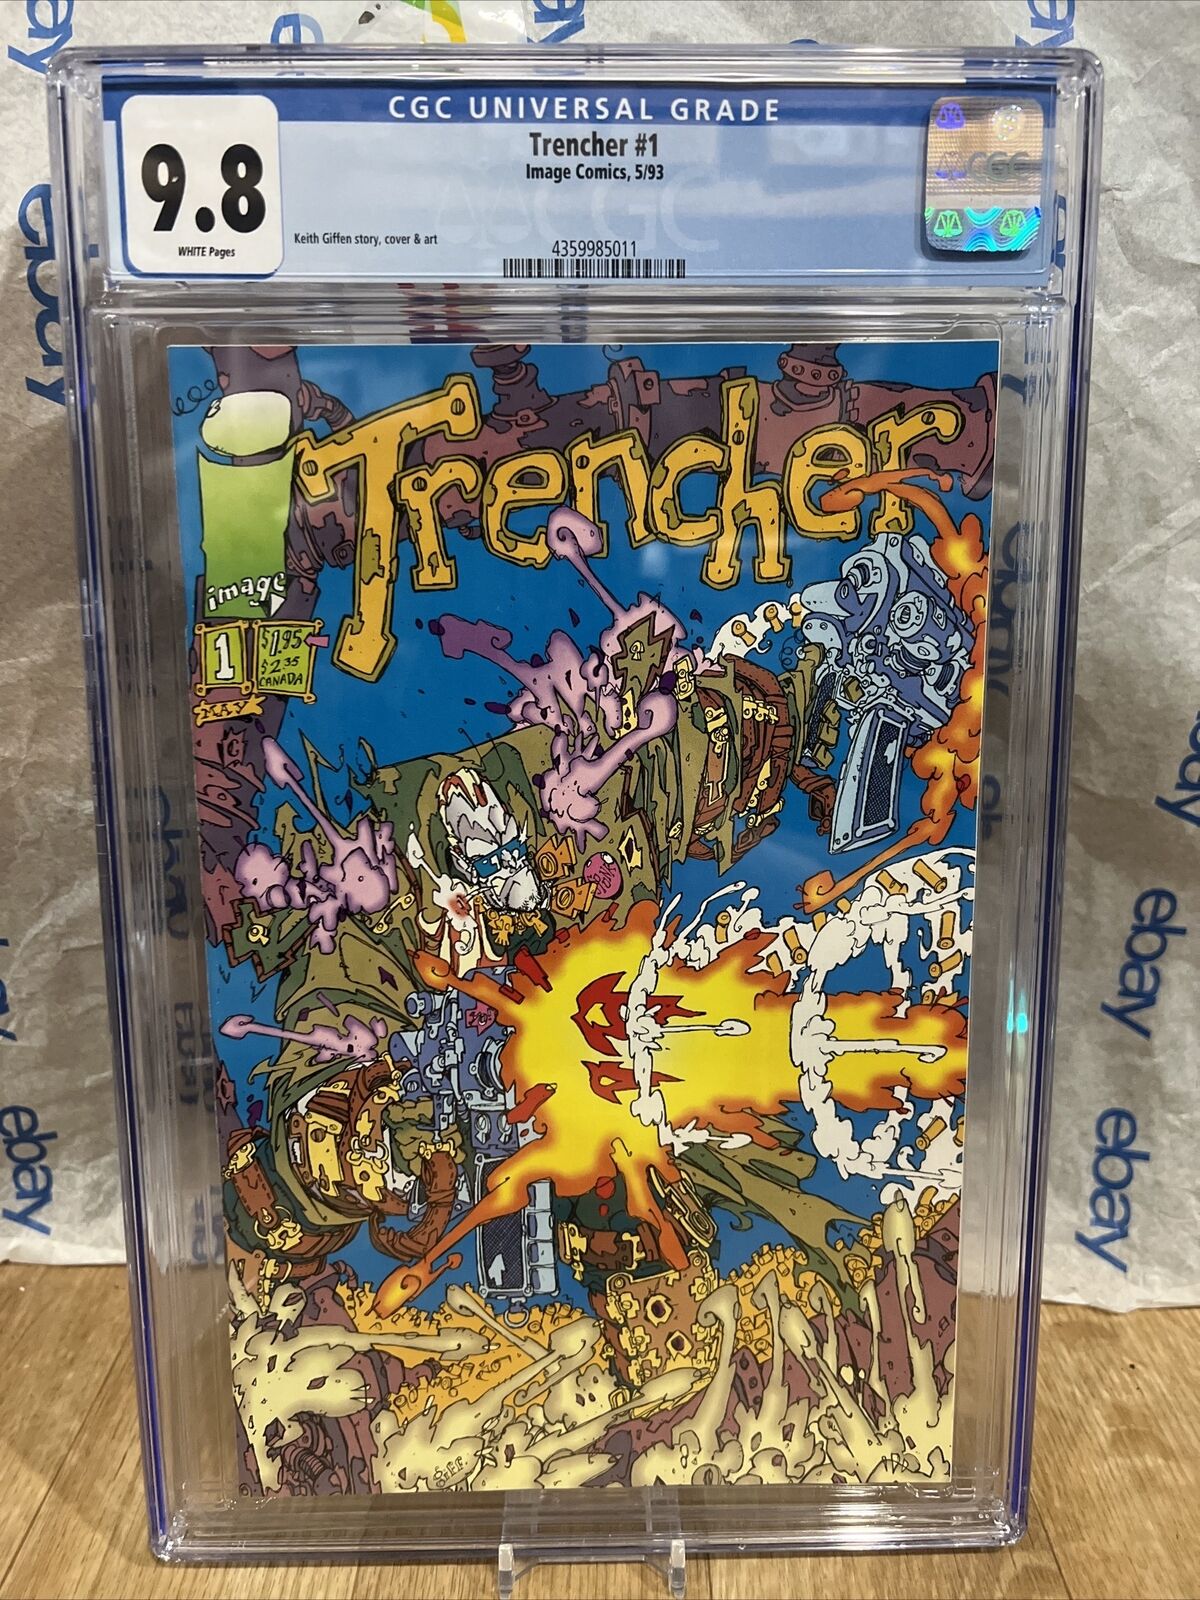 TRENCHER #1 CGC 9.8 IMAGE 1993 NEWLY GRADED RARE  Comic Key Issue